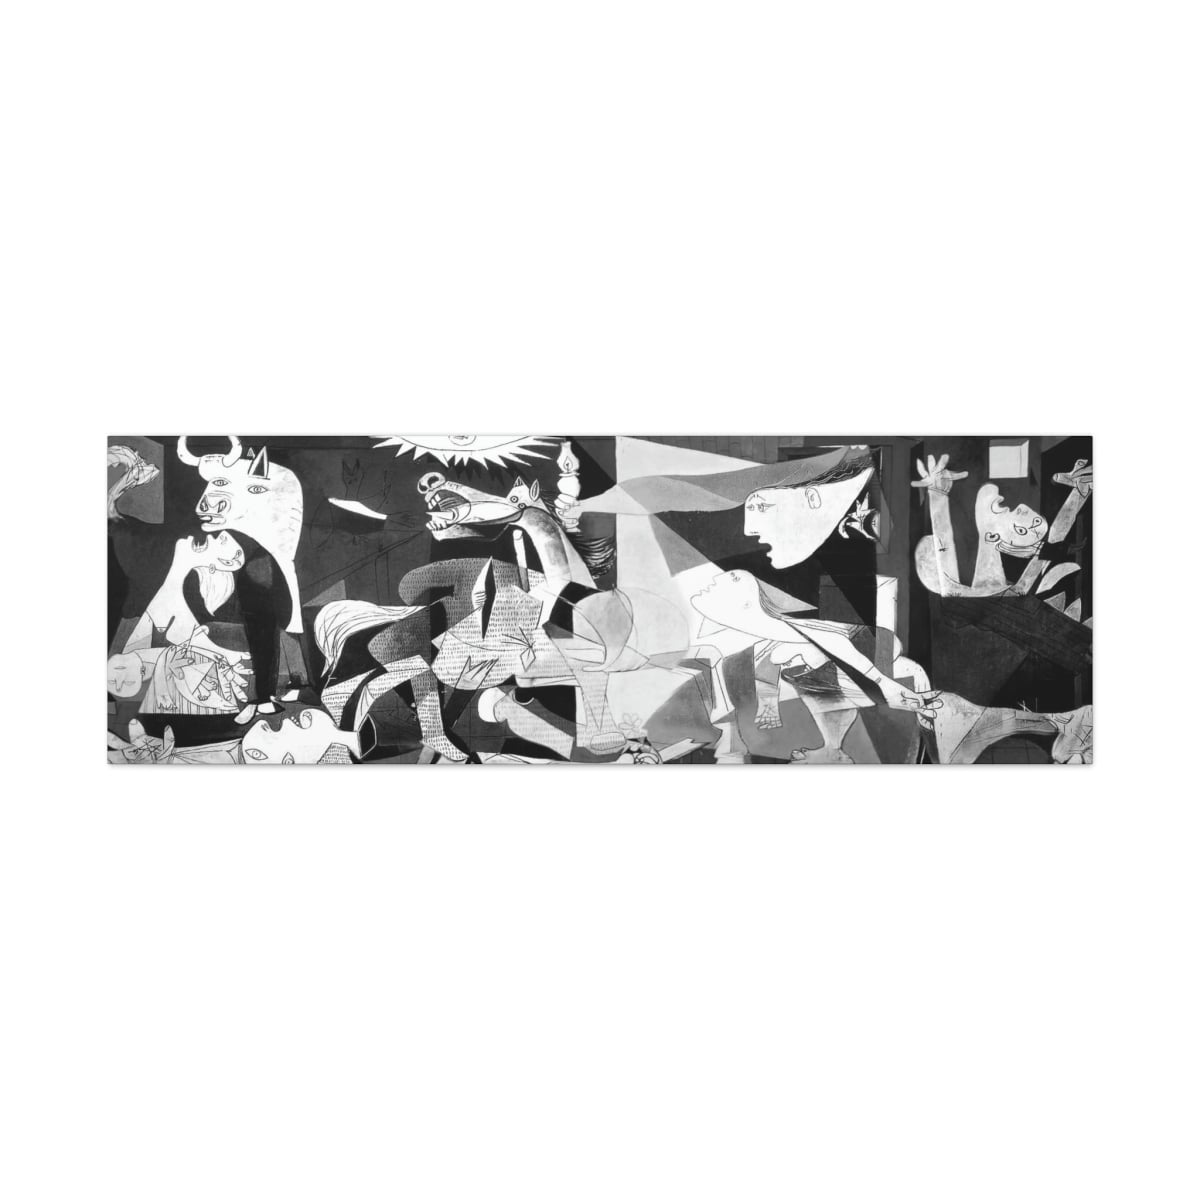 Guernica by Pablo Picasso Art Canvas Gallery Wraps